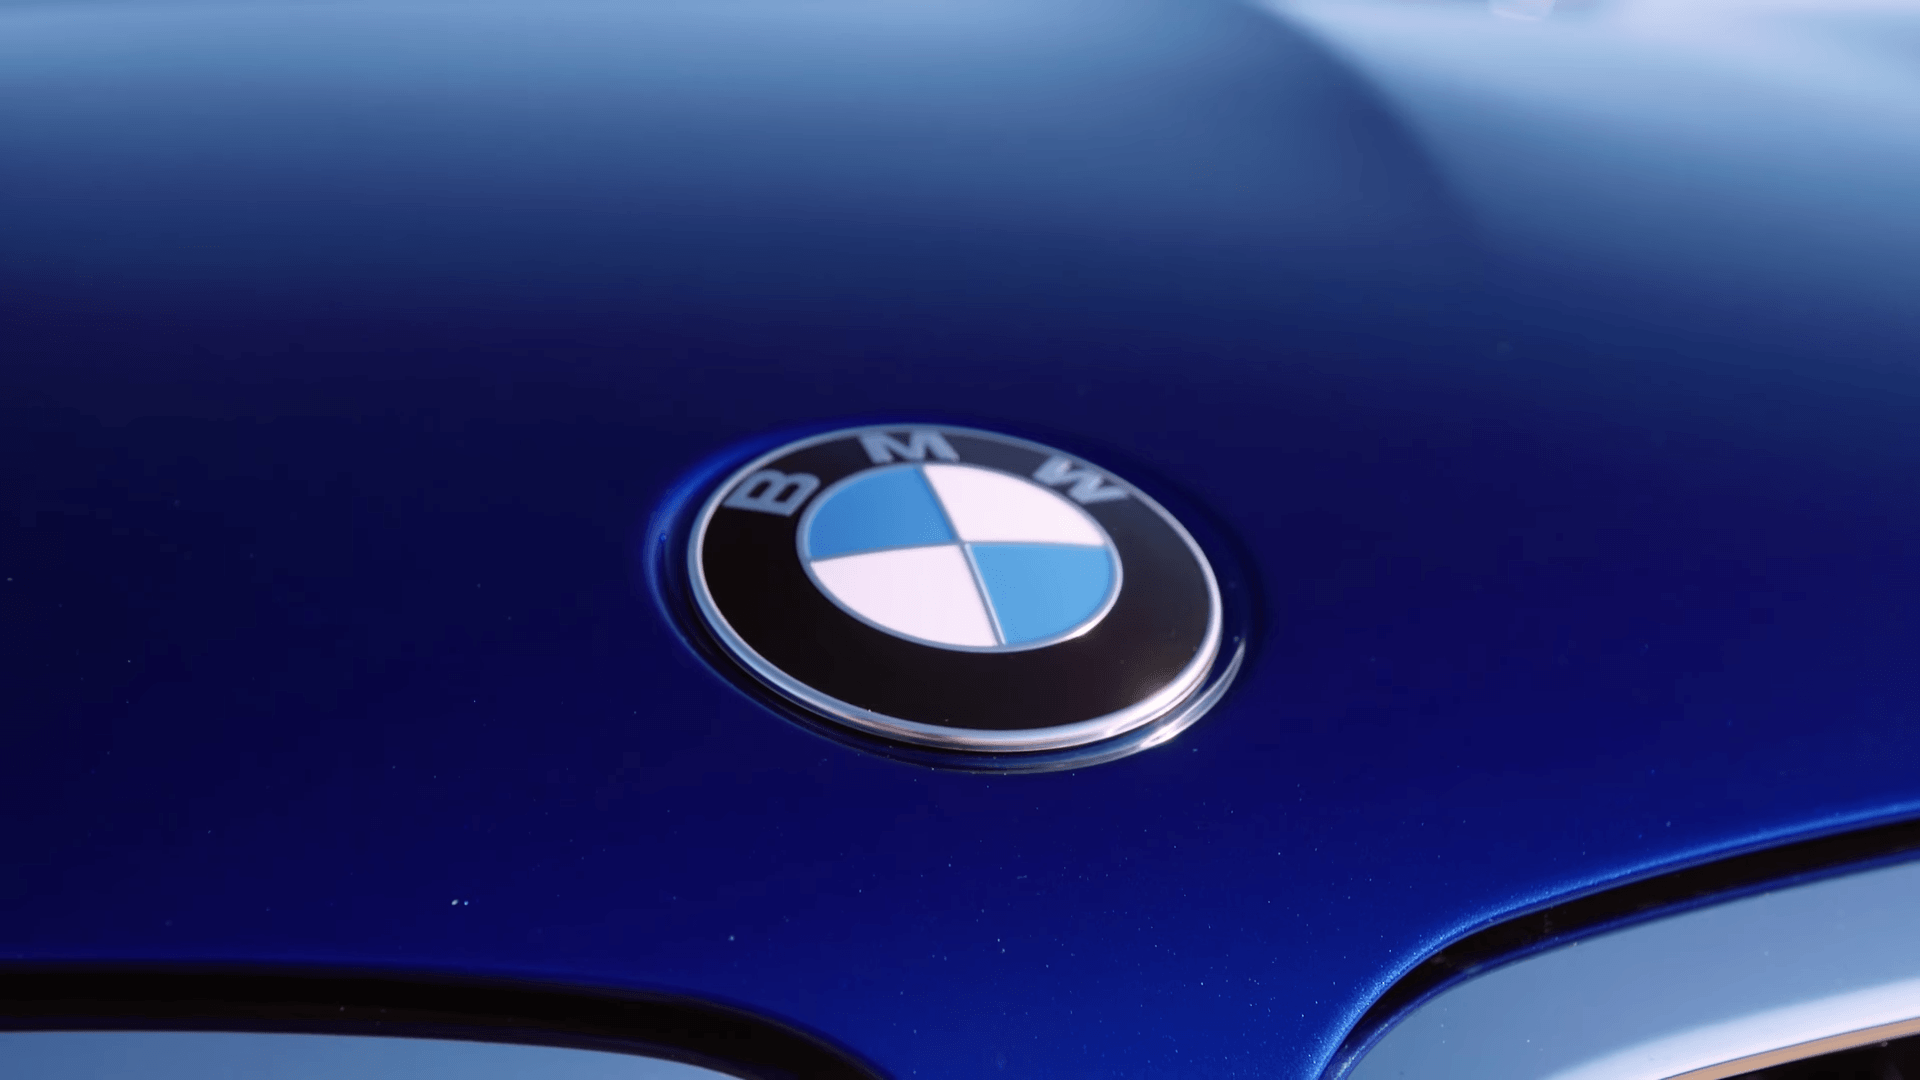 BMW M5 Logo View HD Wallpaper for iPhone, Android & Desktop Background